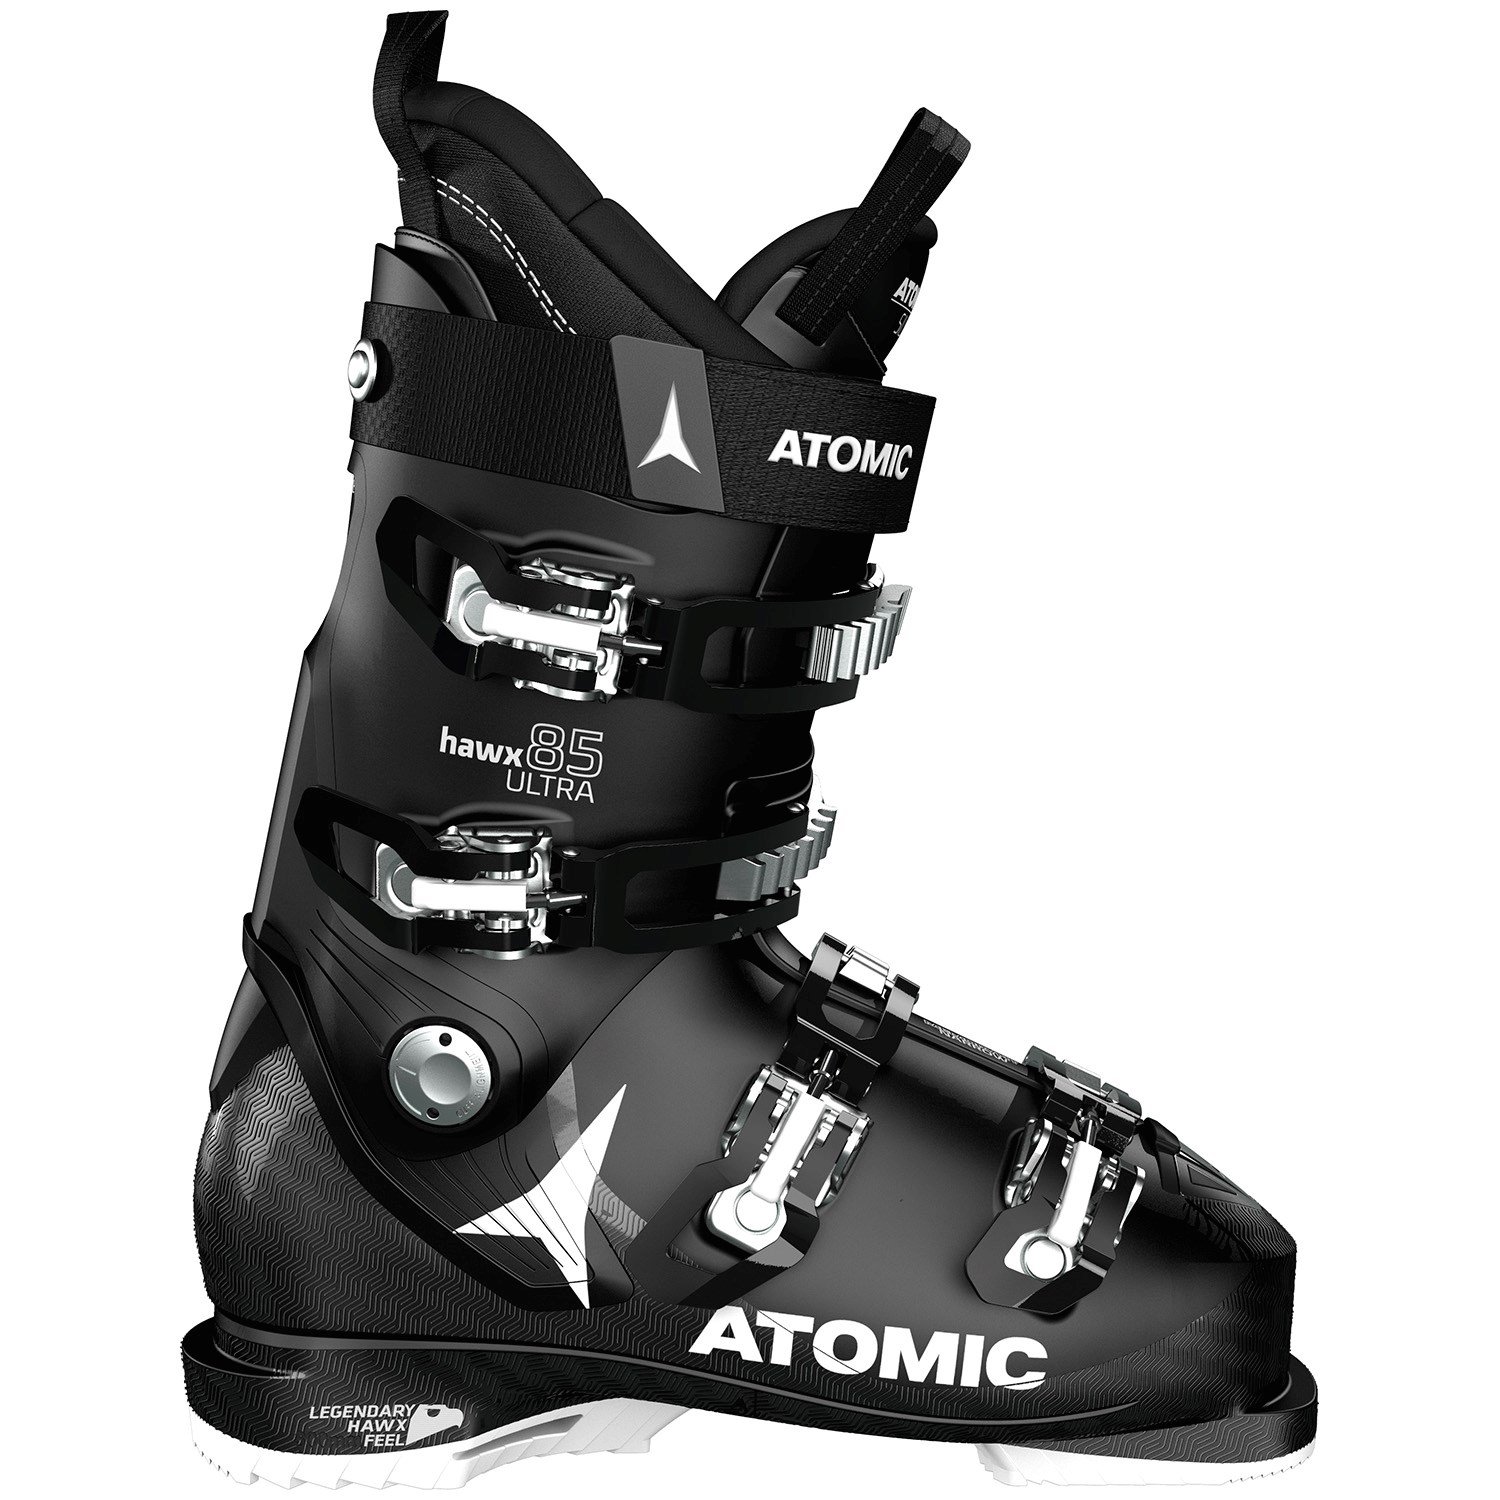 Atomic Replacement Ski Boot Heels and Toes Hawx Ultra and Prime 2018 Large B16 